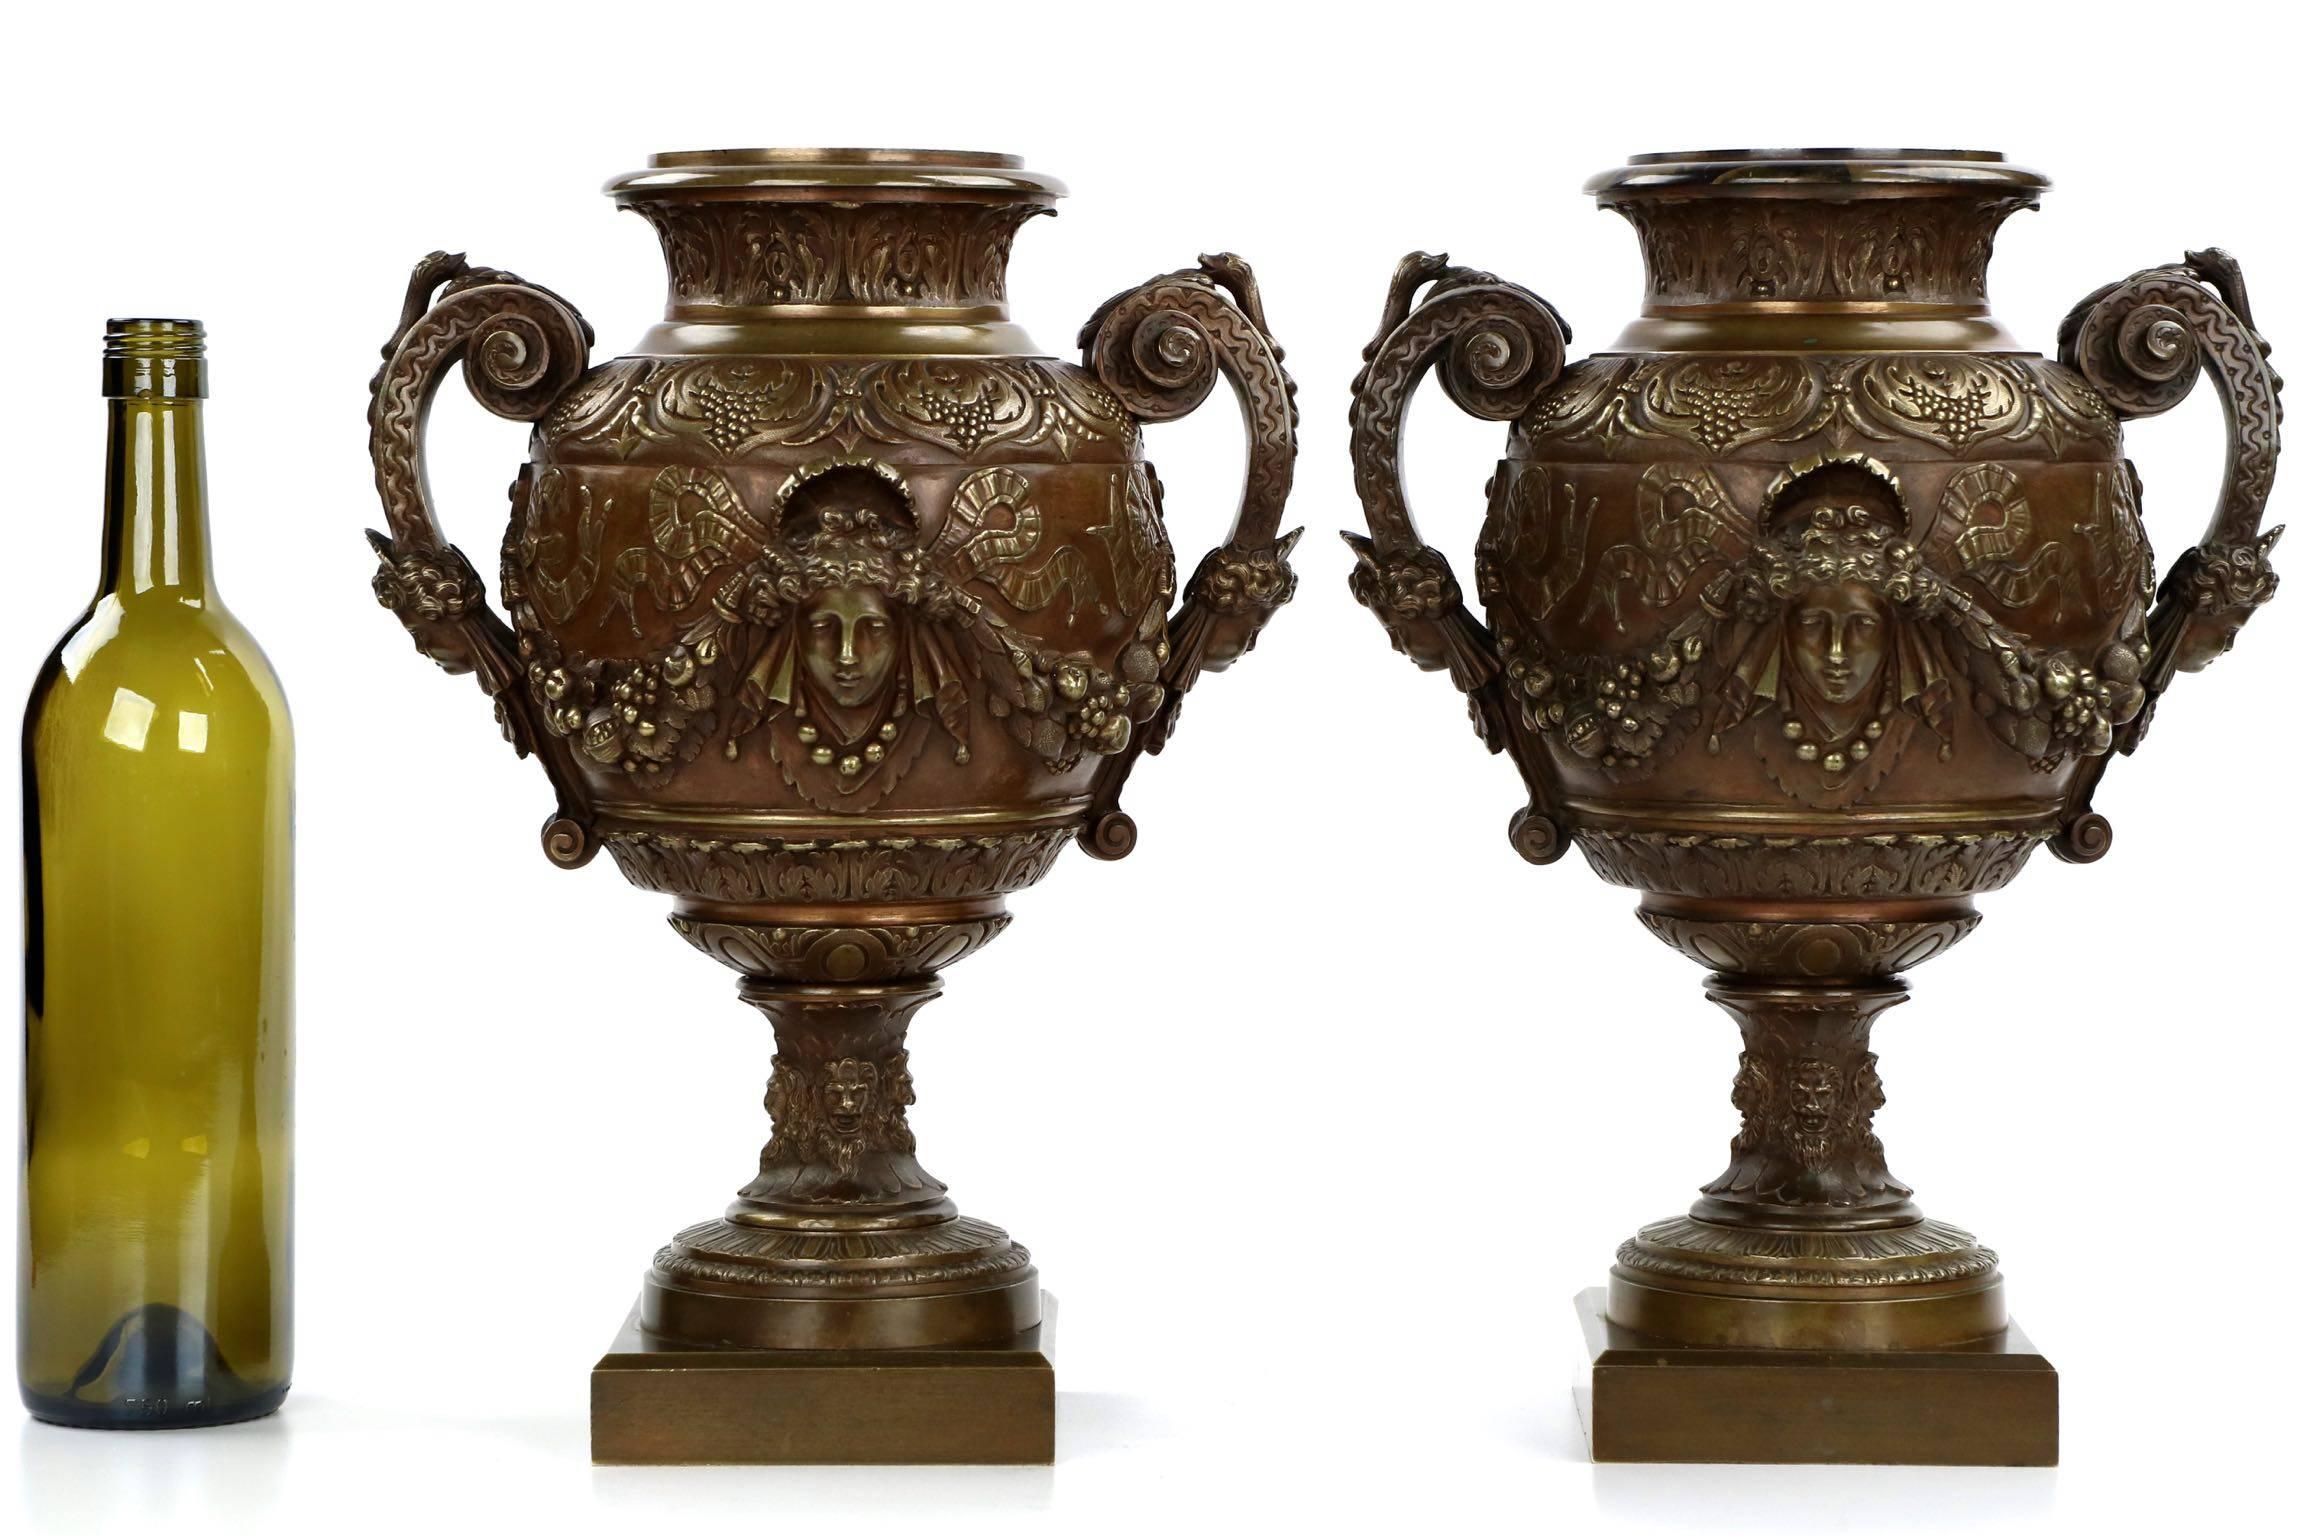 A powerful pair of vases with intricate classical castings set symmetrically across all surfaces, these are a most fine strikepoint for a mantel or hallway console.  The female masks on either side are flanked by furls of twisting ribbon that